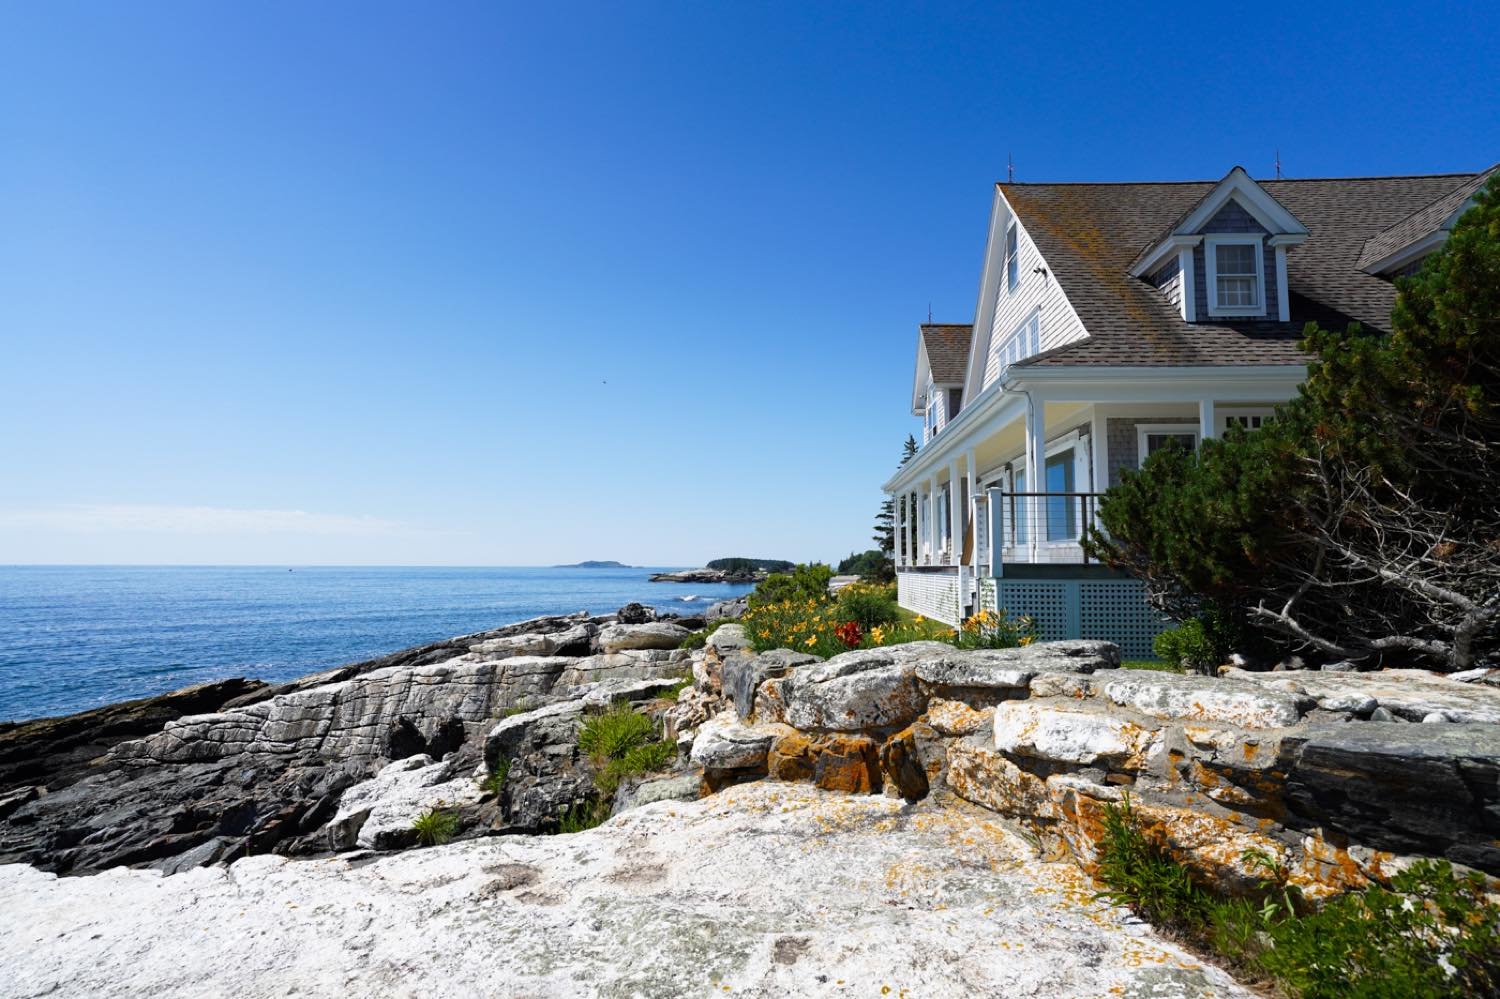  The quintessential coastal Maine home with stunning views to the Atlantic Ocean, pine covered islands and the iconic glacial rock slab the home sits on. A wrap around porch and the classic New England aesthetic complement this most ideal setting.  F